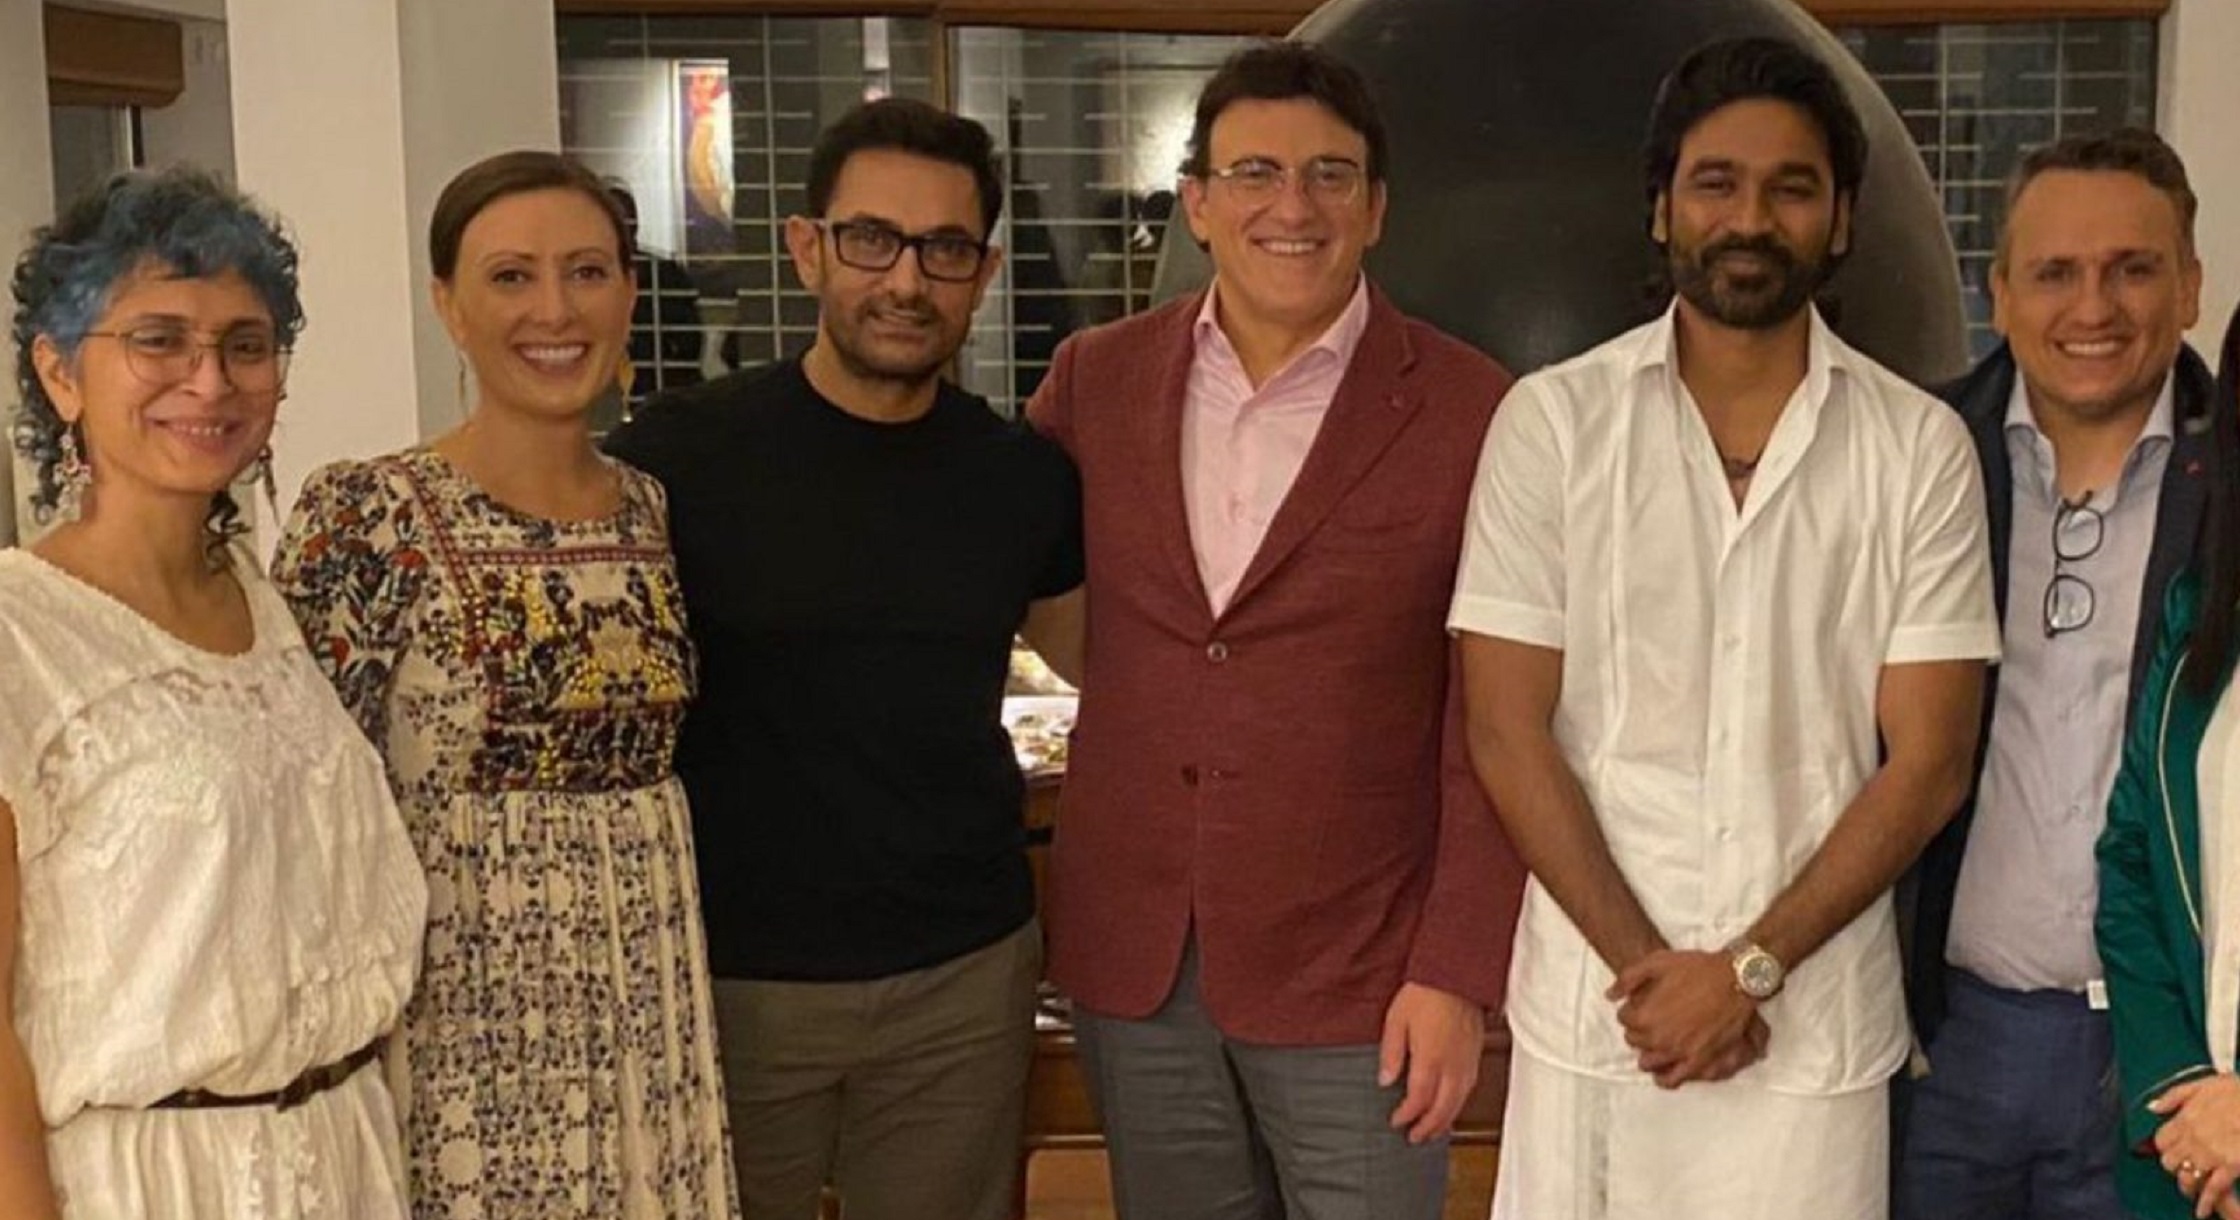 Aamir Khan Hosts Special Gujarati Dinner For Avengers Directors The Russo Brothers & Dhanush At His Residence